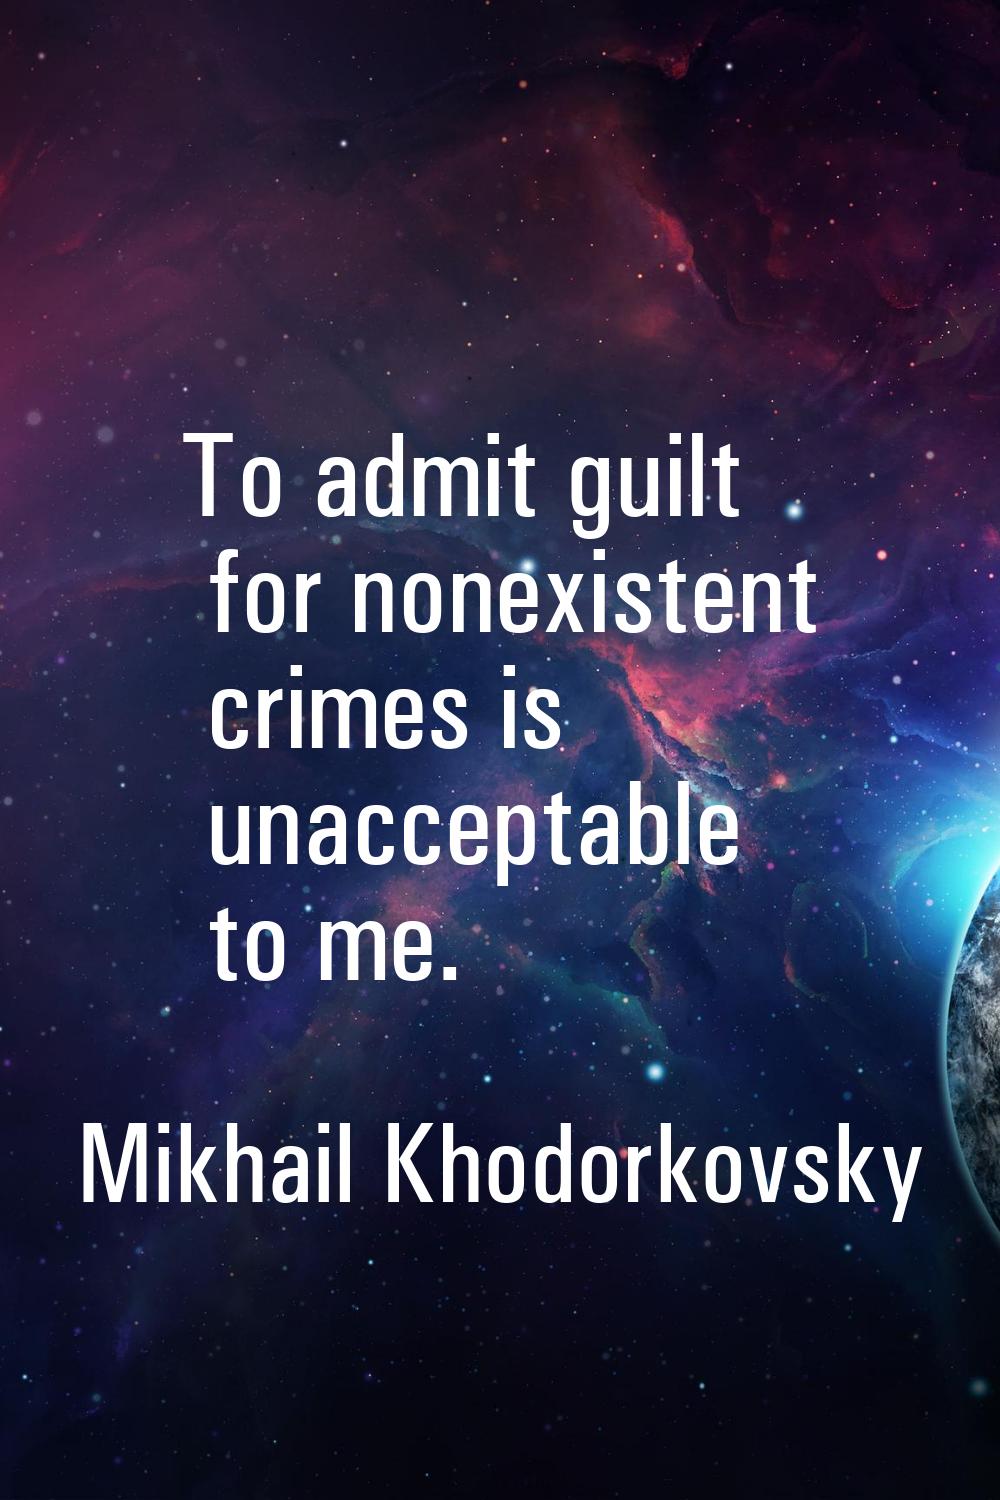 To admit guilt for nonexistent crimes is unacceptable to me.